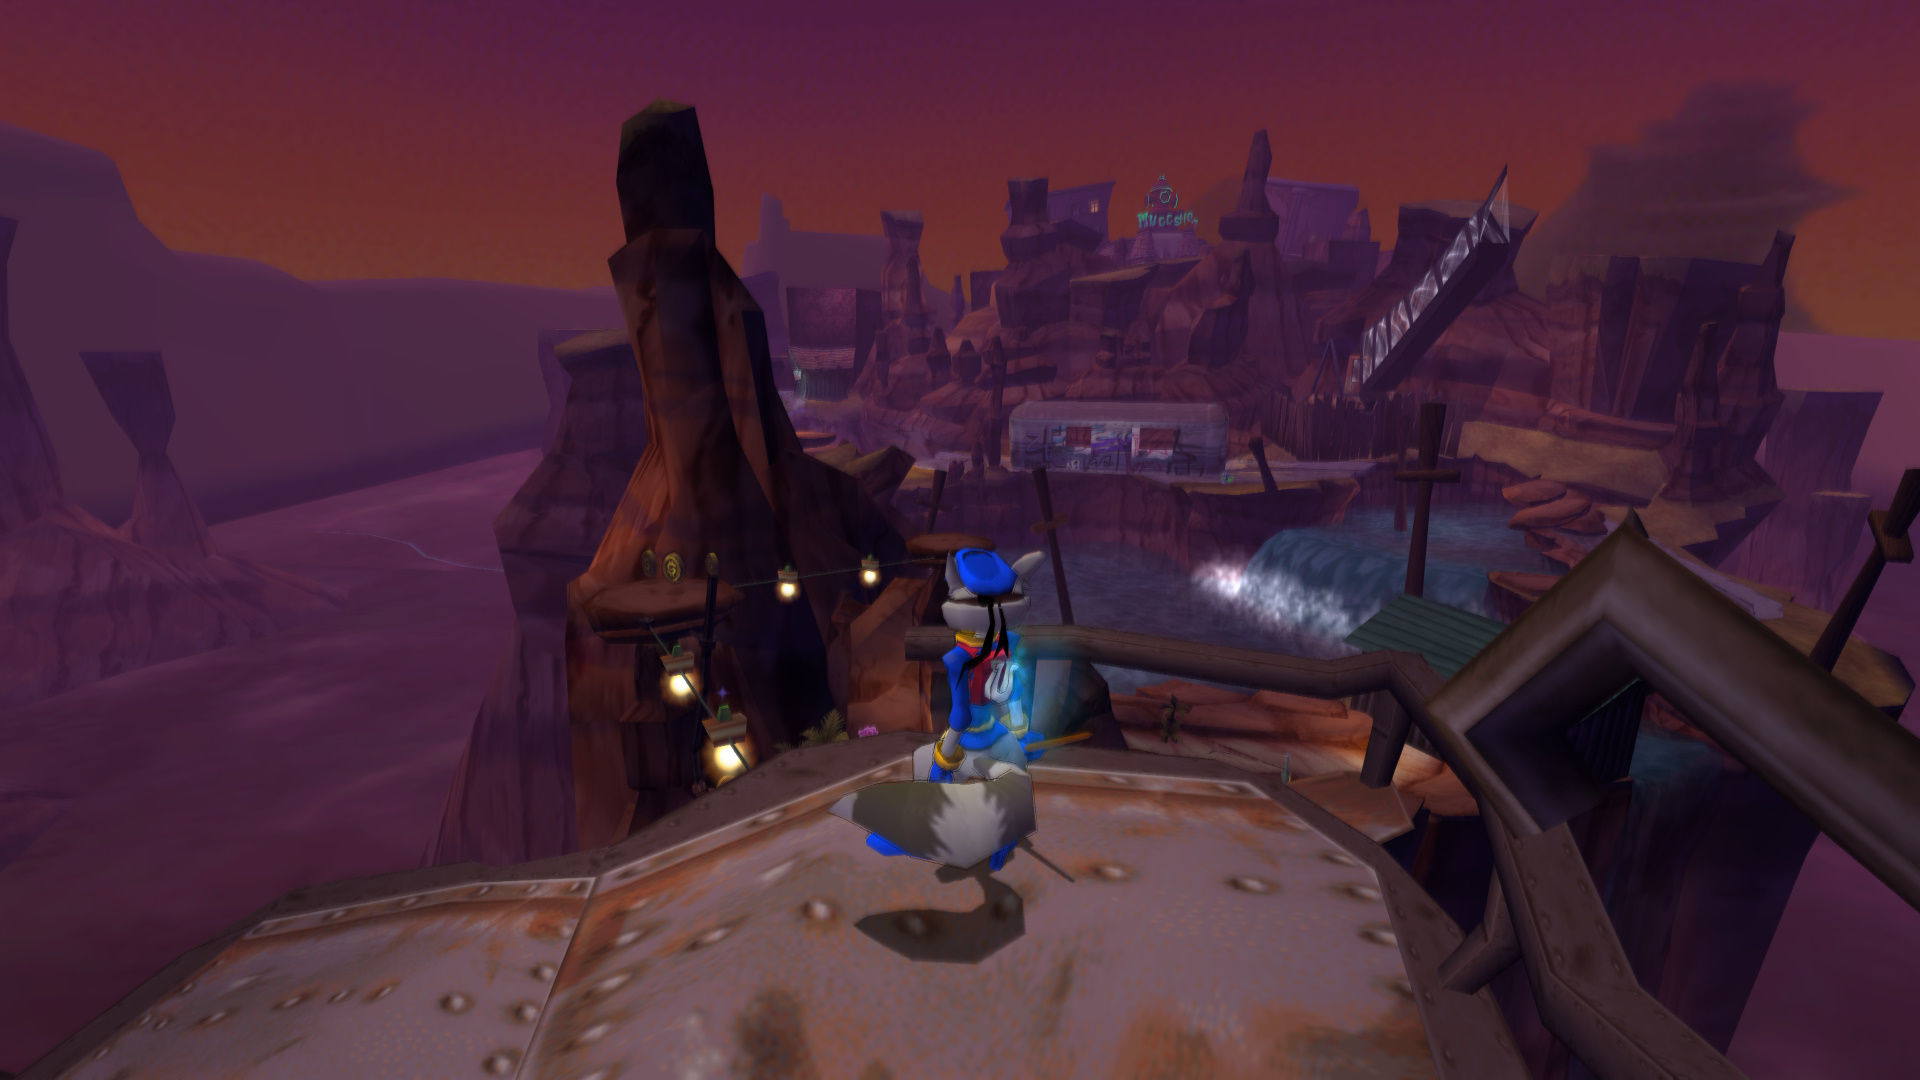 Sly 2: Band of Thieves (USA) PS2 ISO - CDRomance